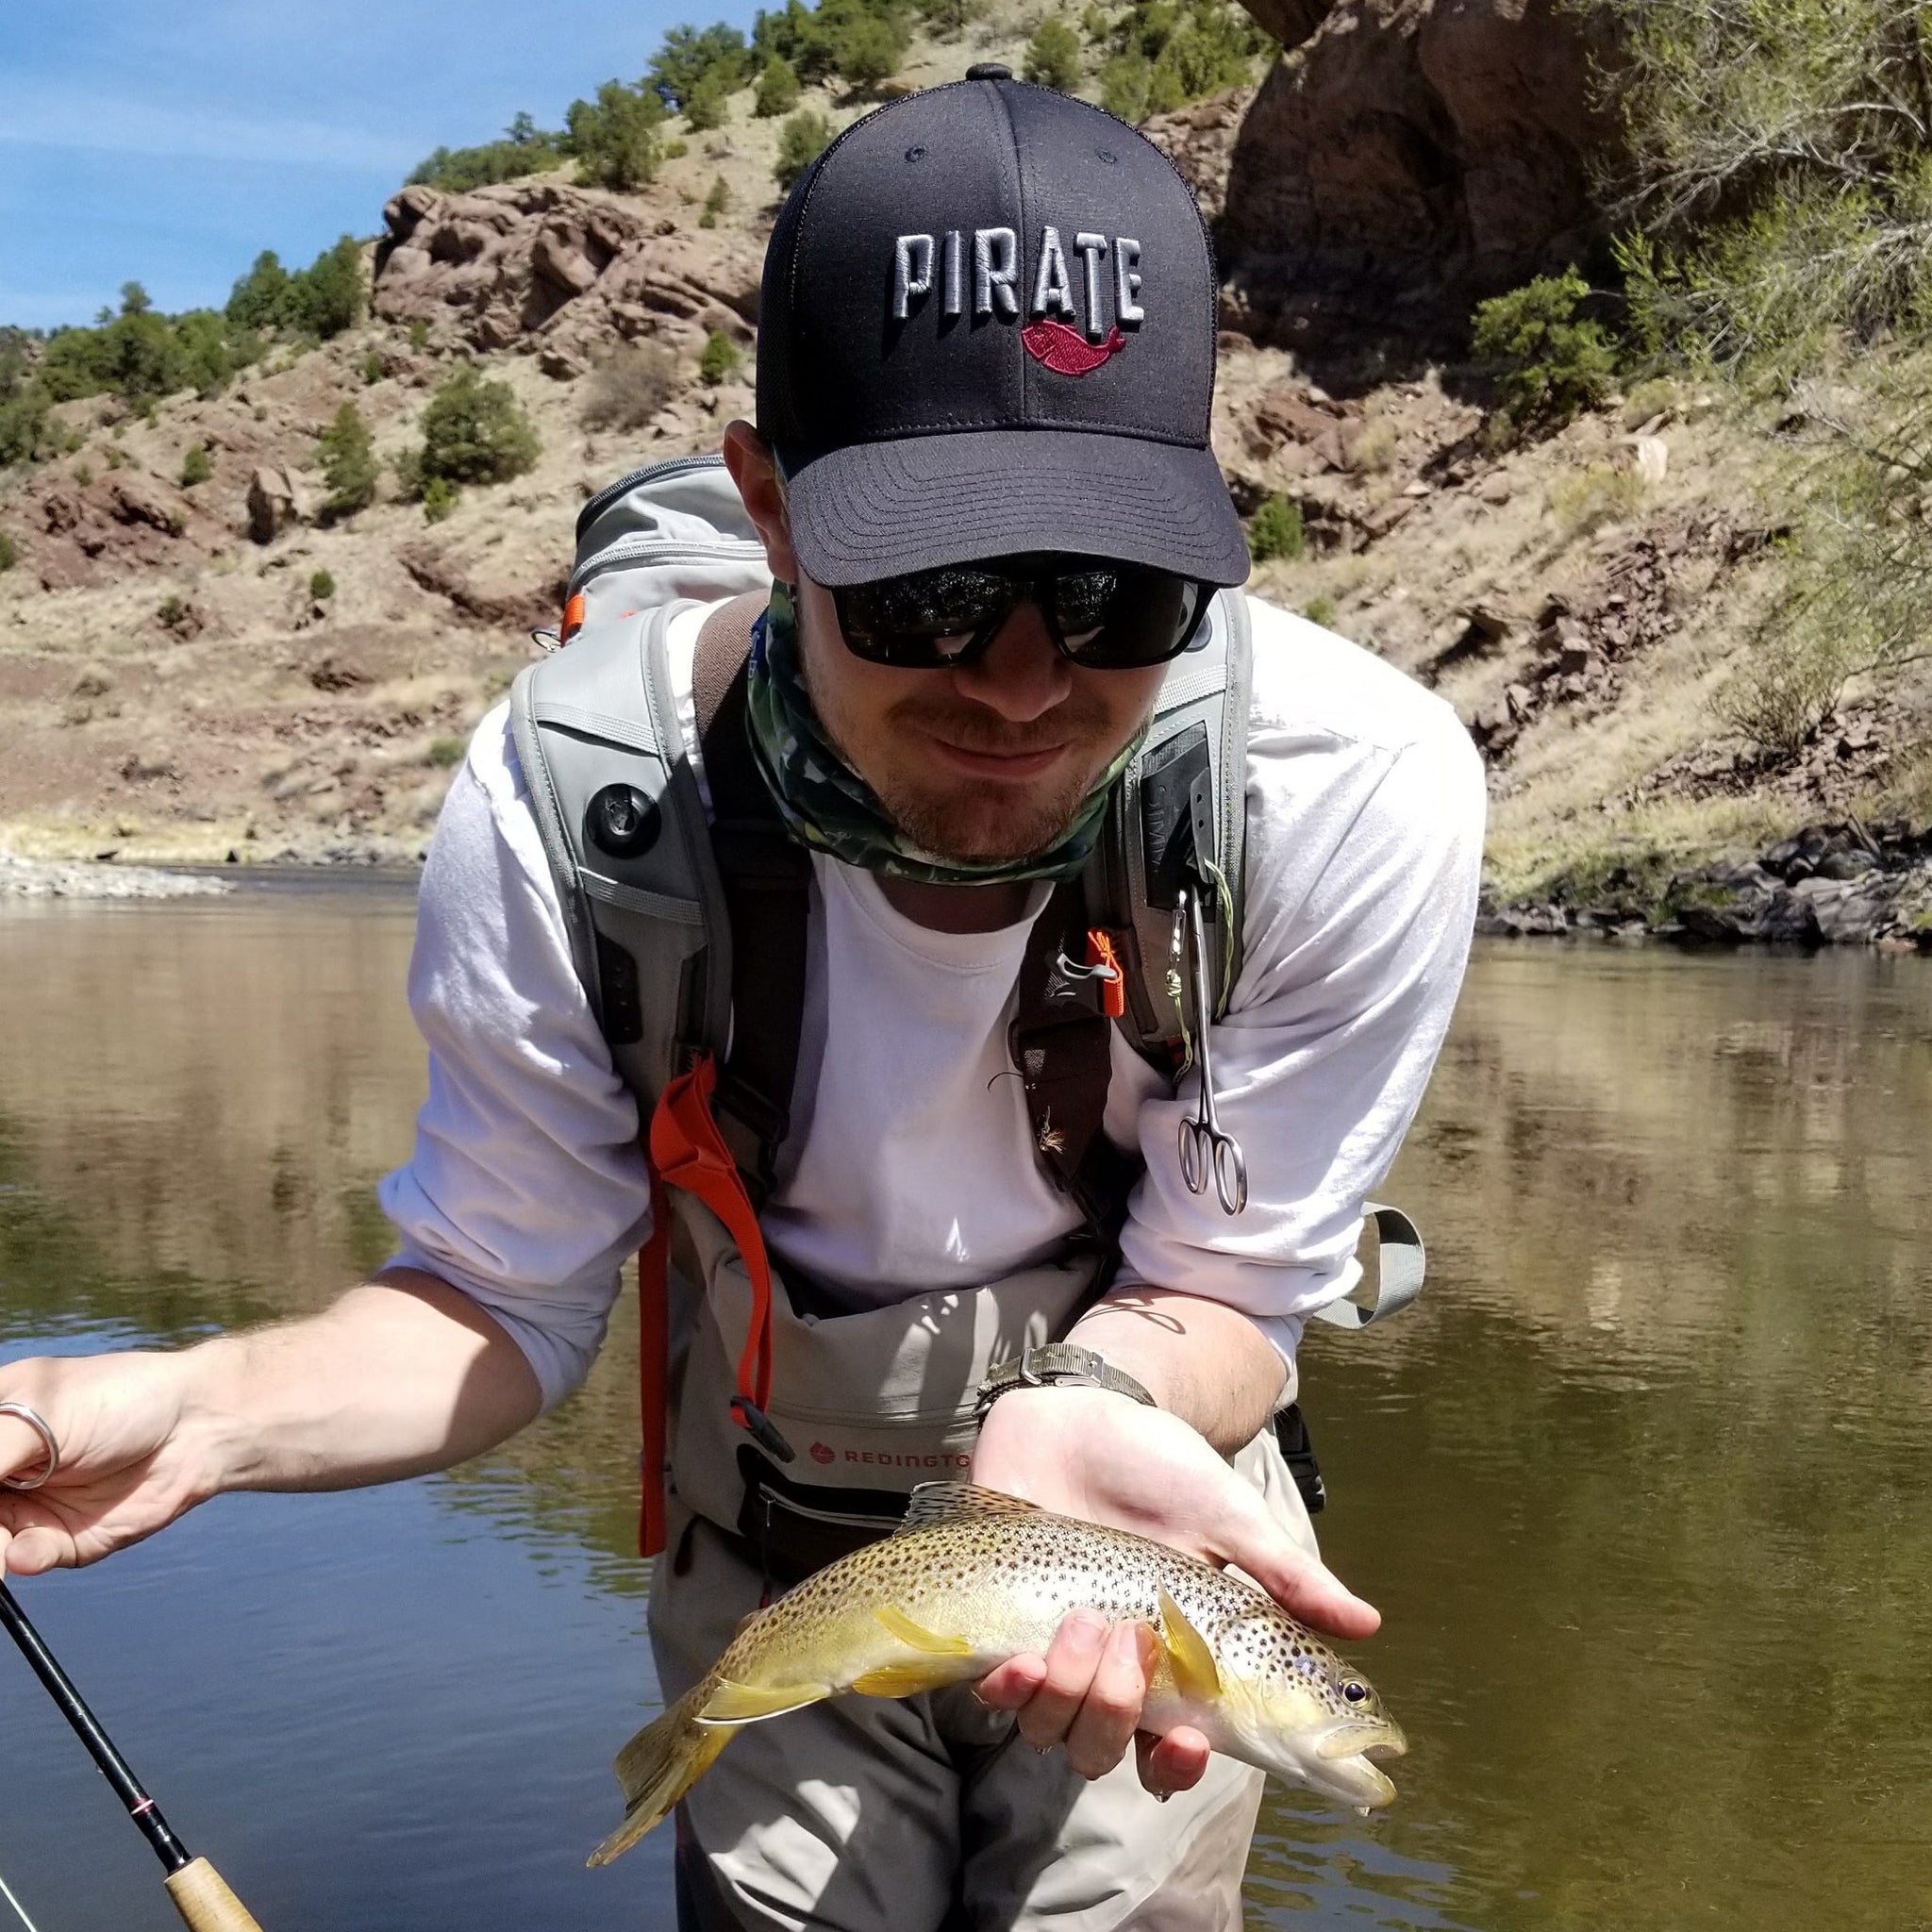 Fly Fishing Hat